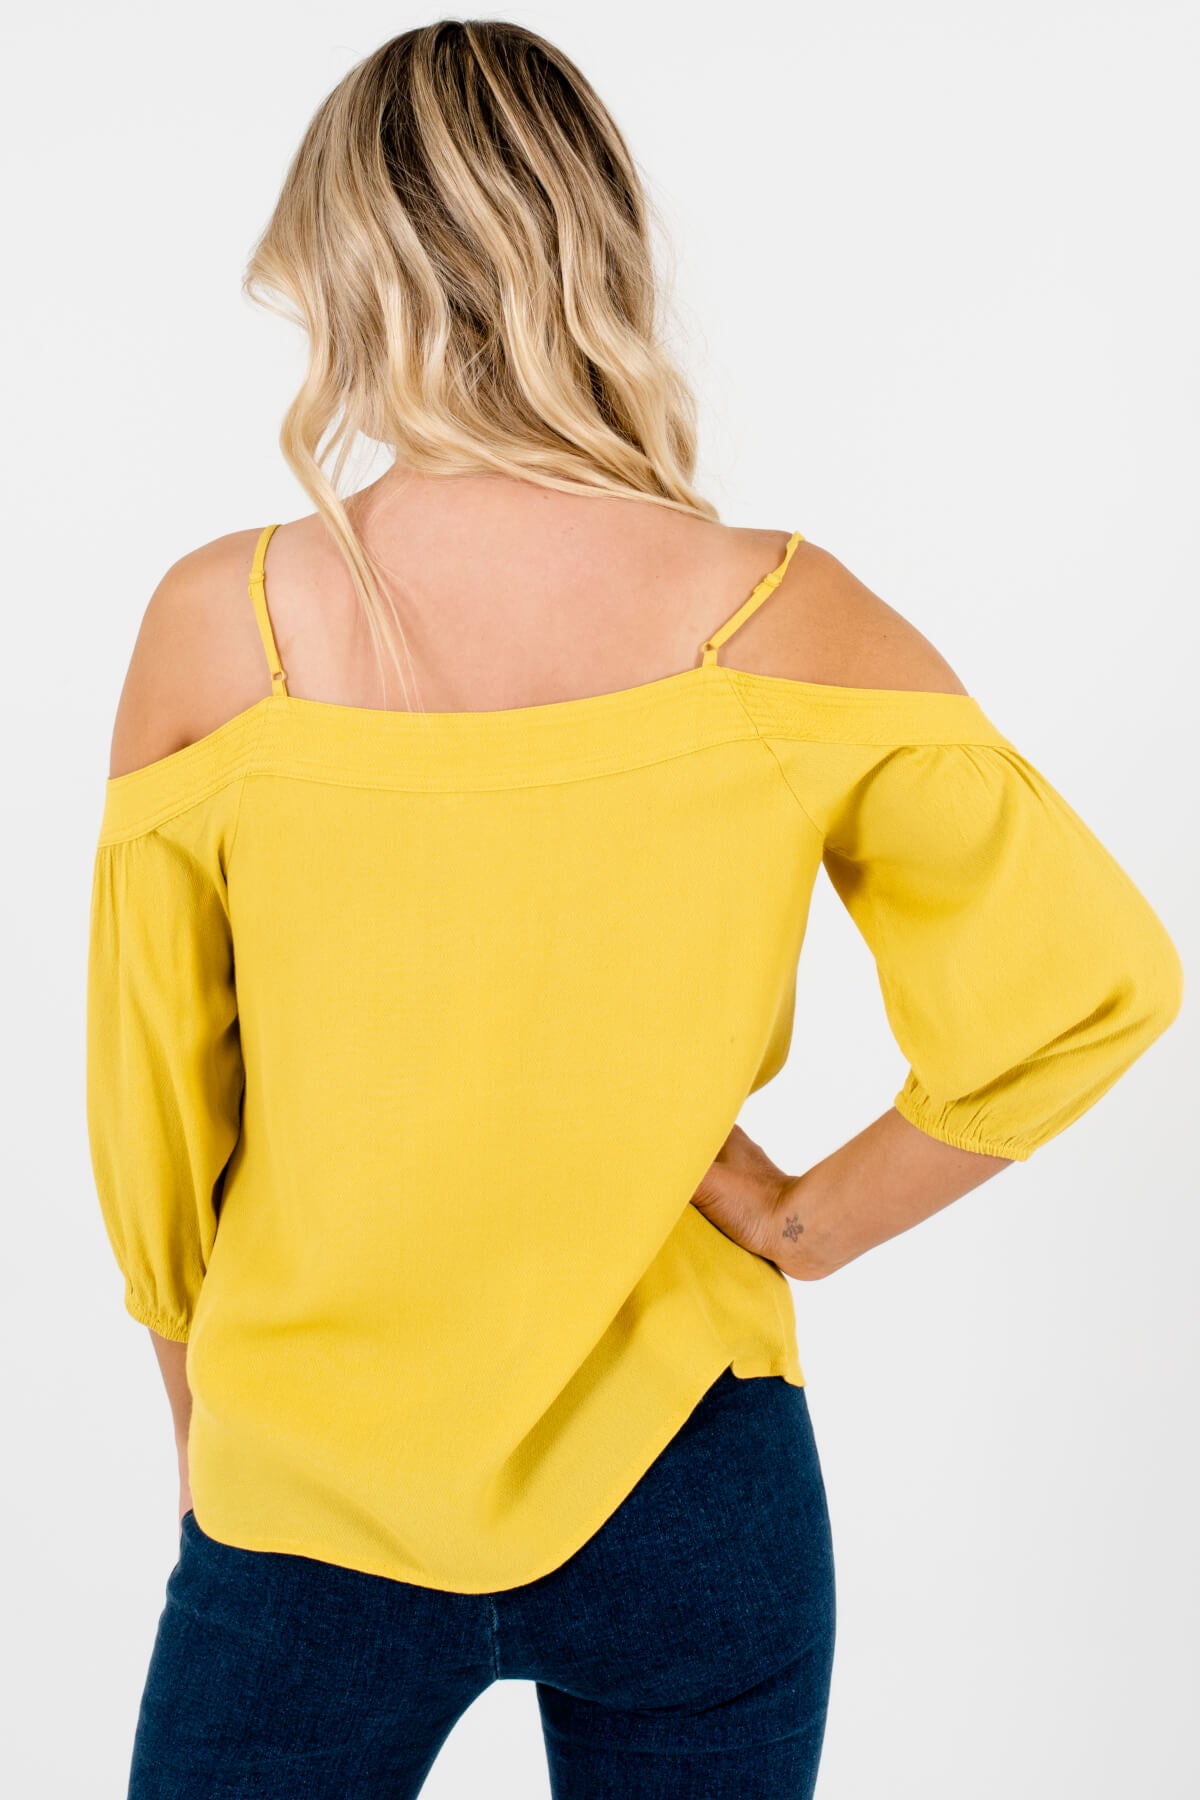 Women's Yellow Adjustable Strap Boutique Tops